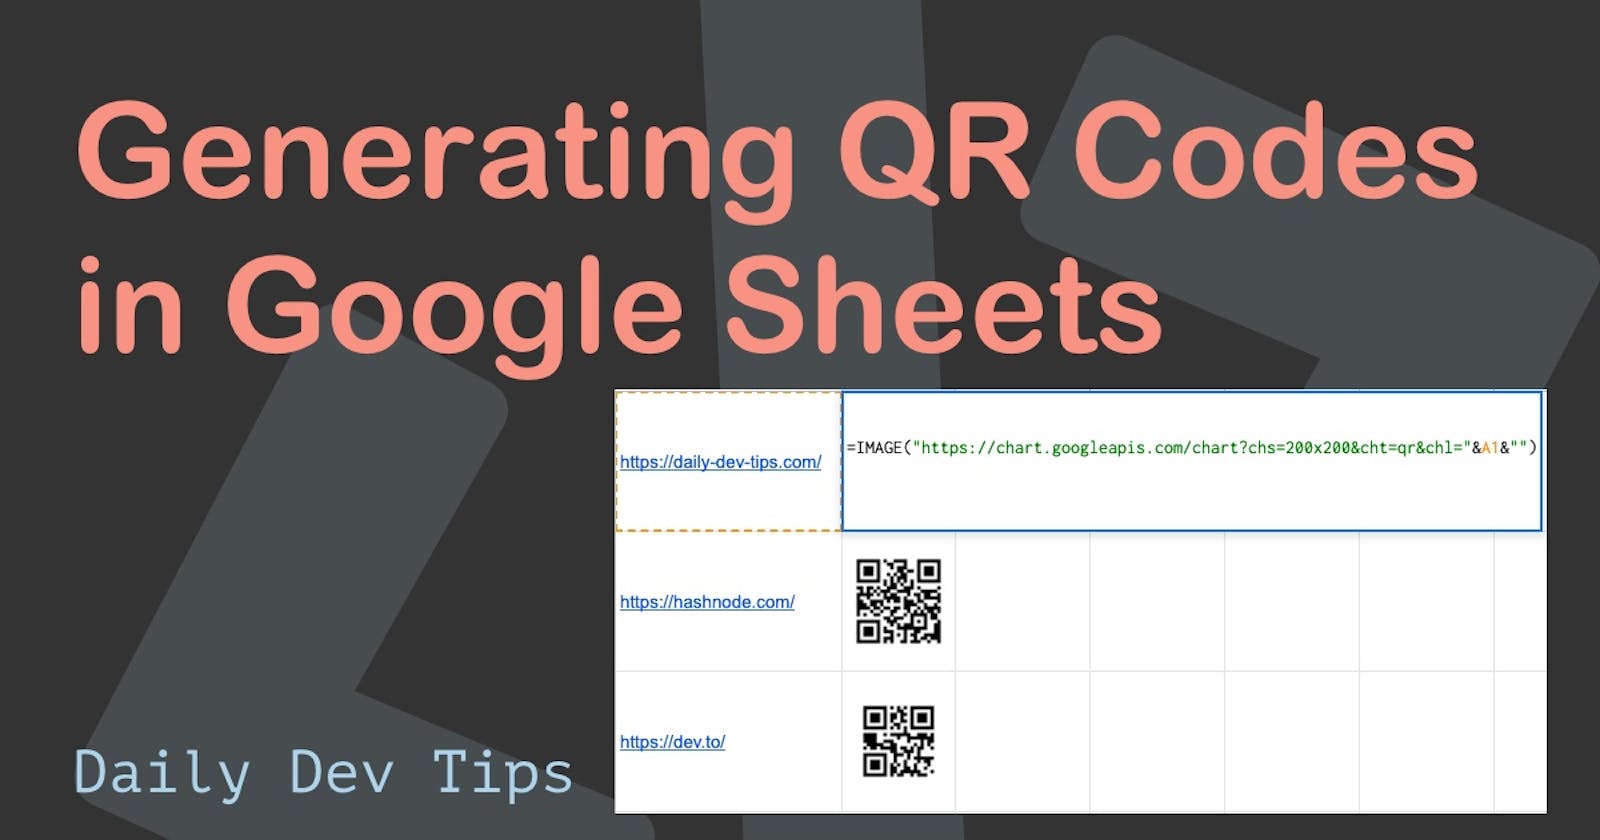 Generating QR Codes in Google Sheets